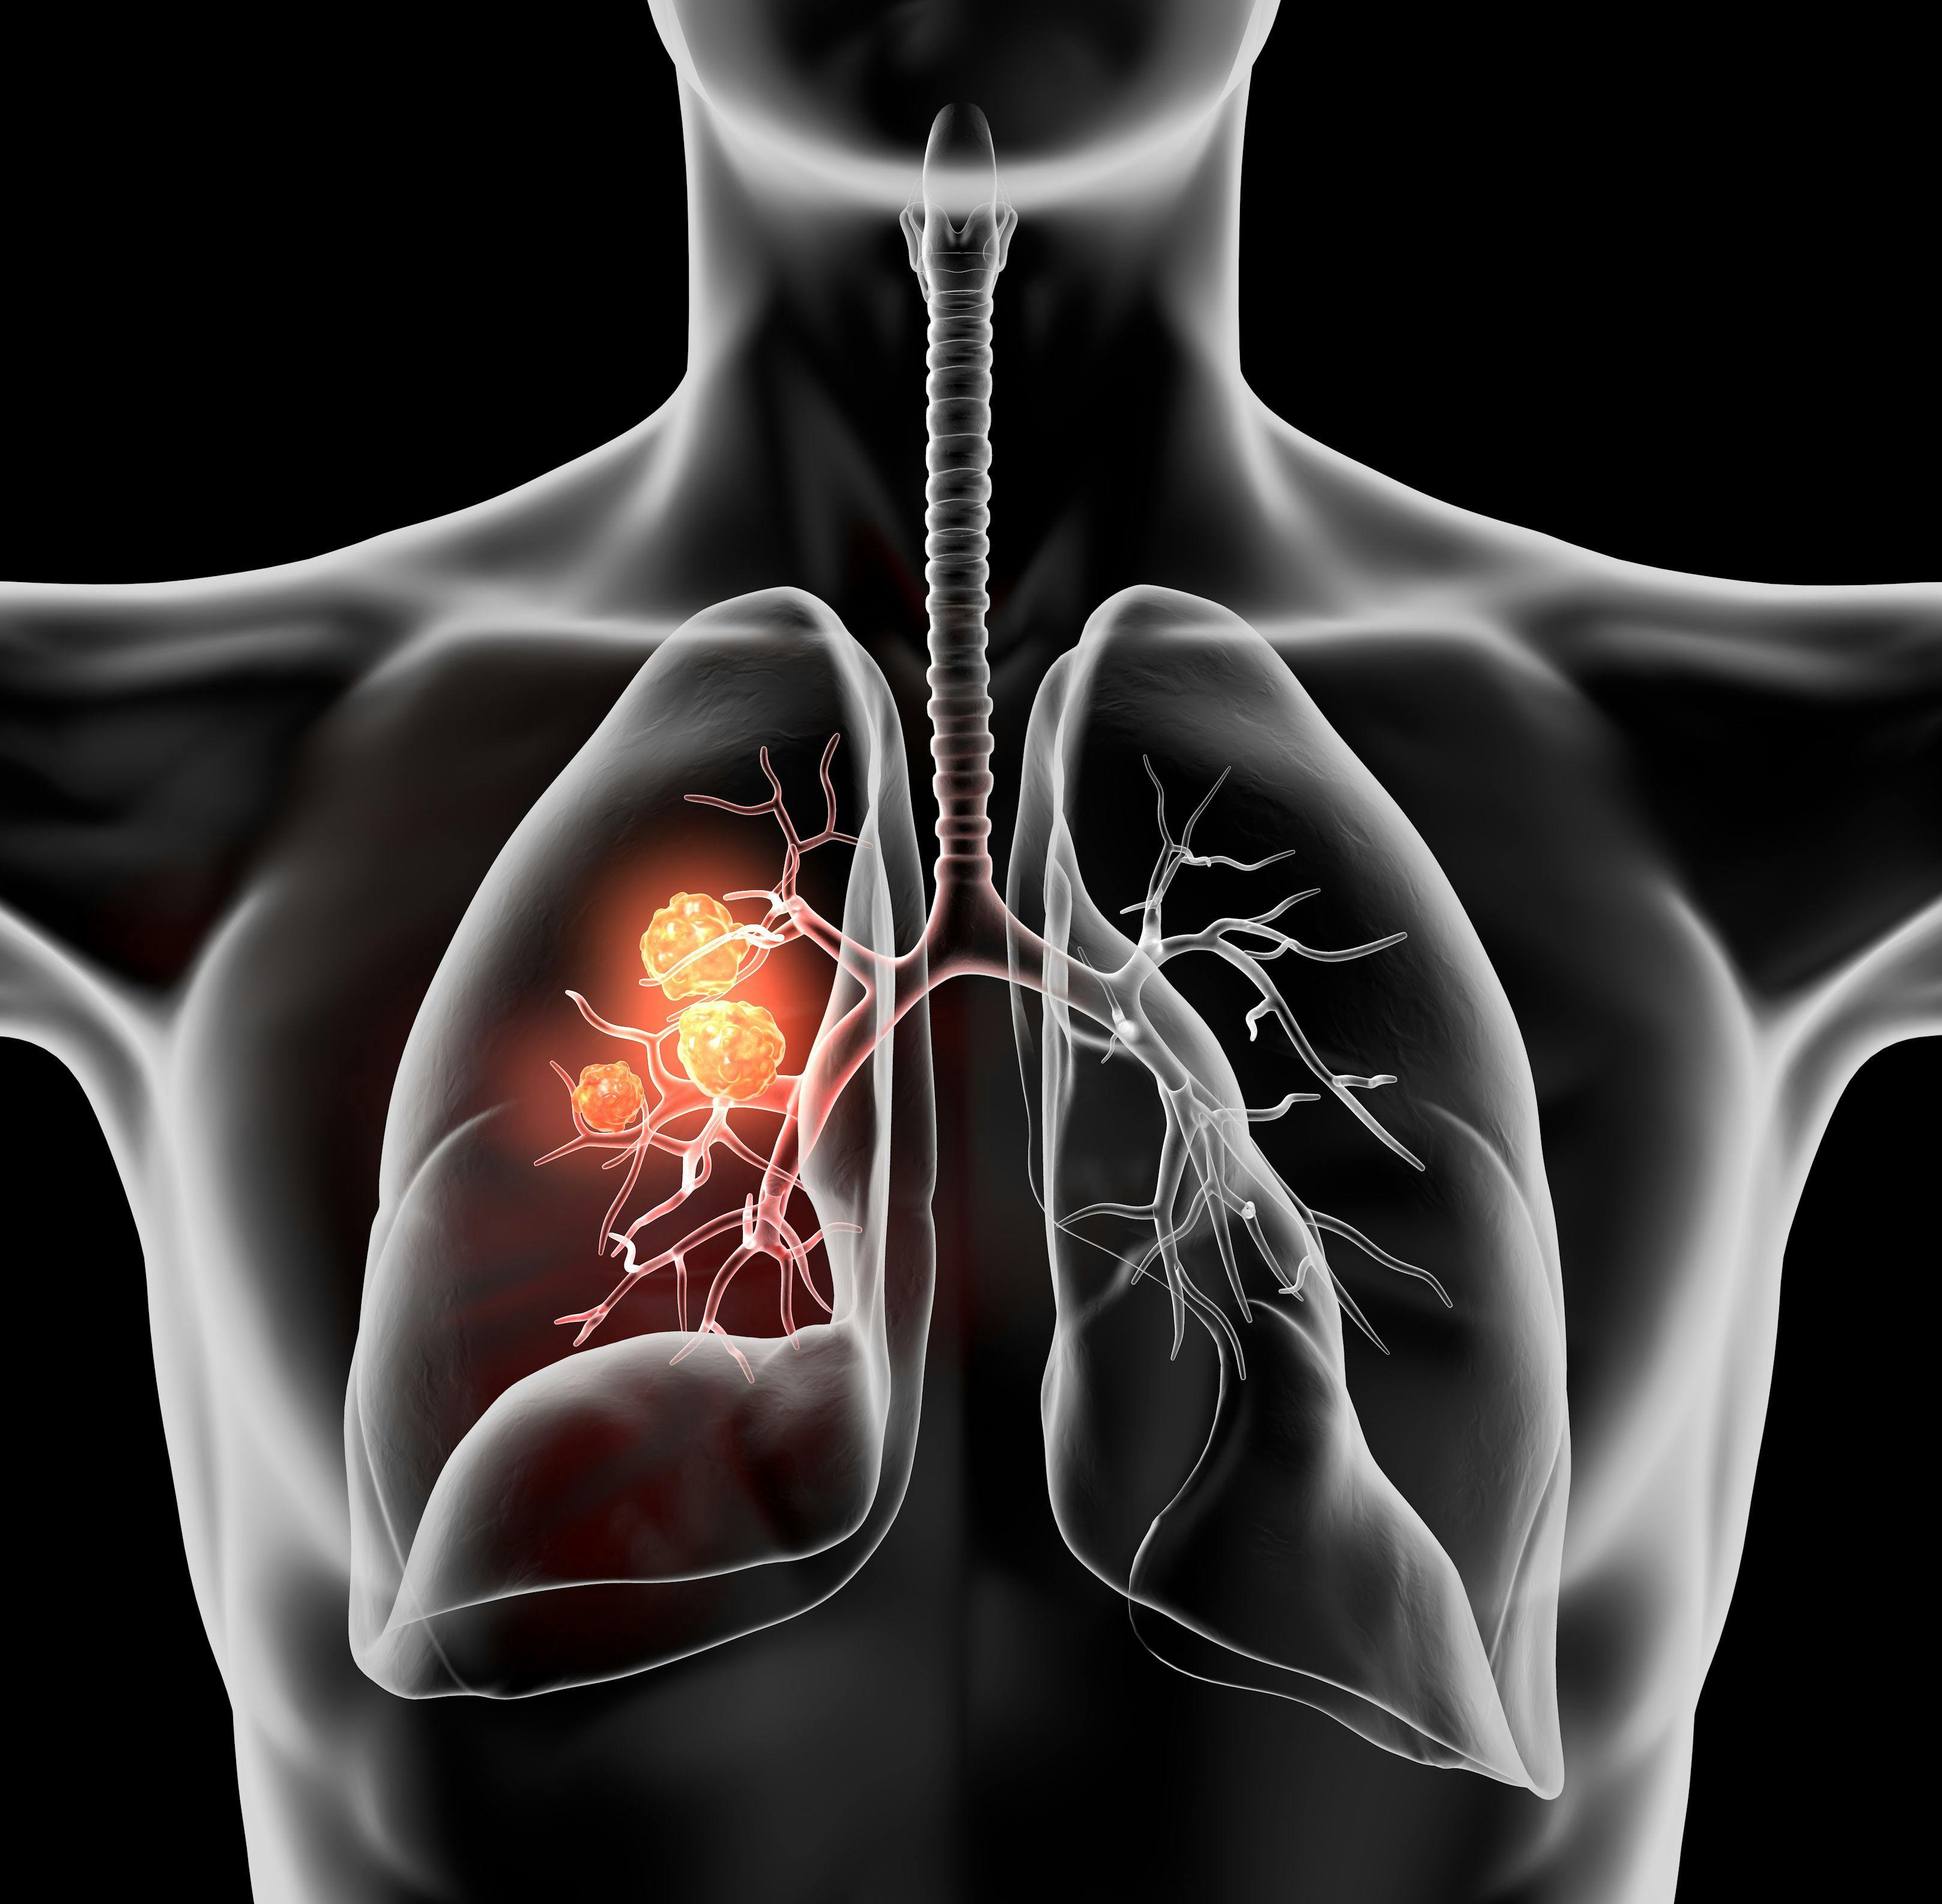 Combination of Plinabulin and Docetaxel More Effective Than Docetaxel Alone in Certain Patients With NSCLC